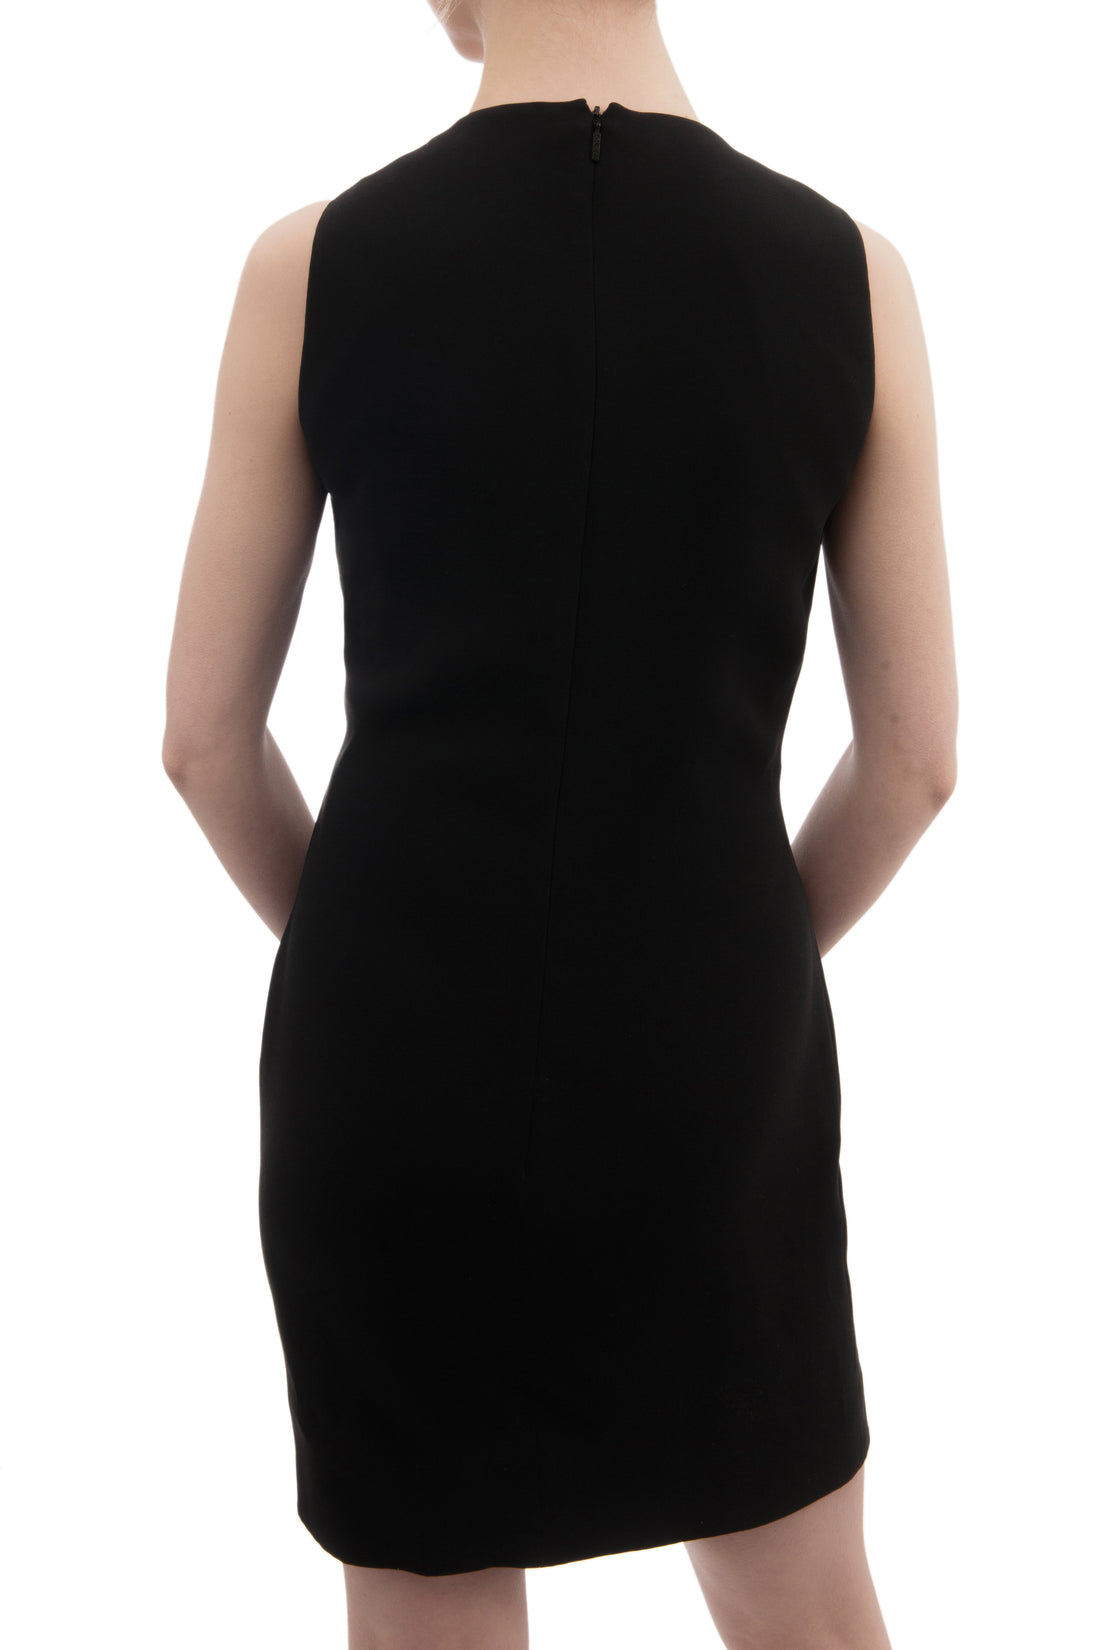 Gucci Black Silk Sleeveless Dress with Gold Metal Plaque at Neck